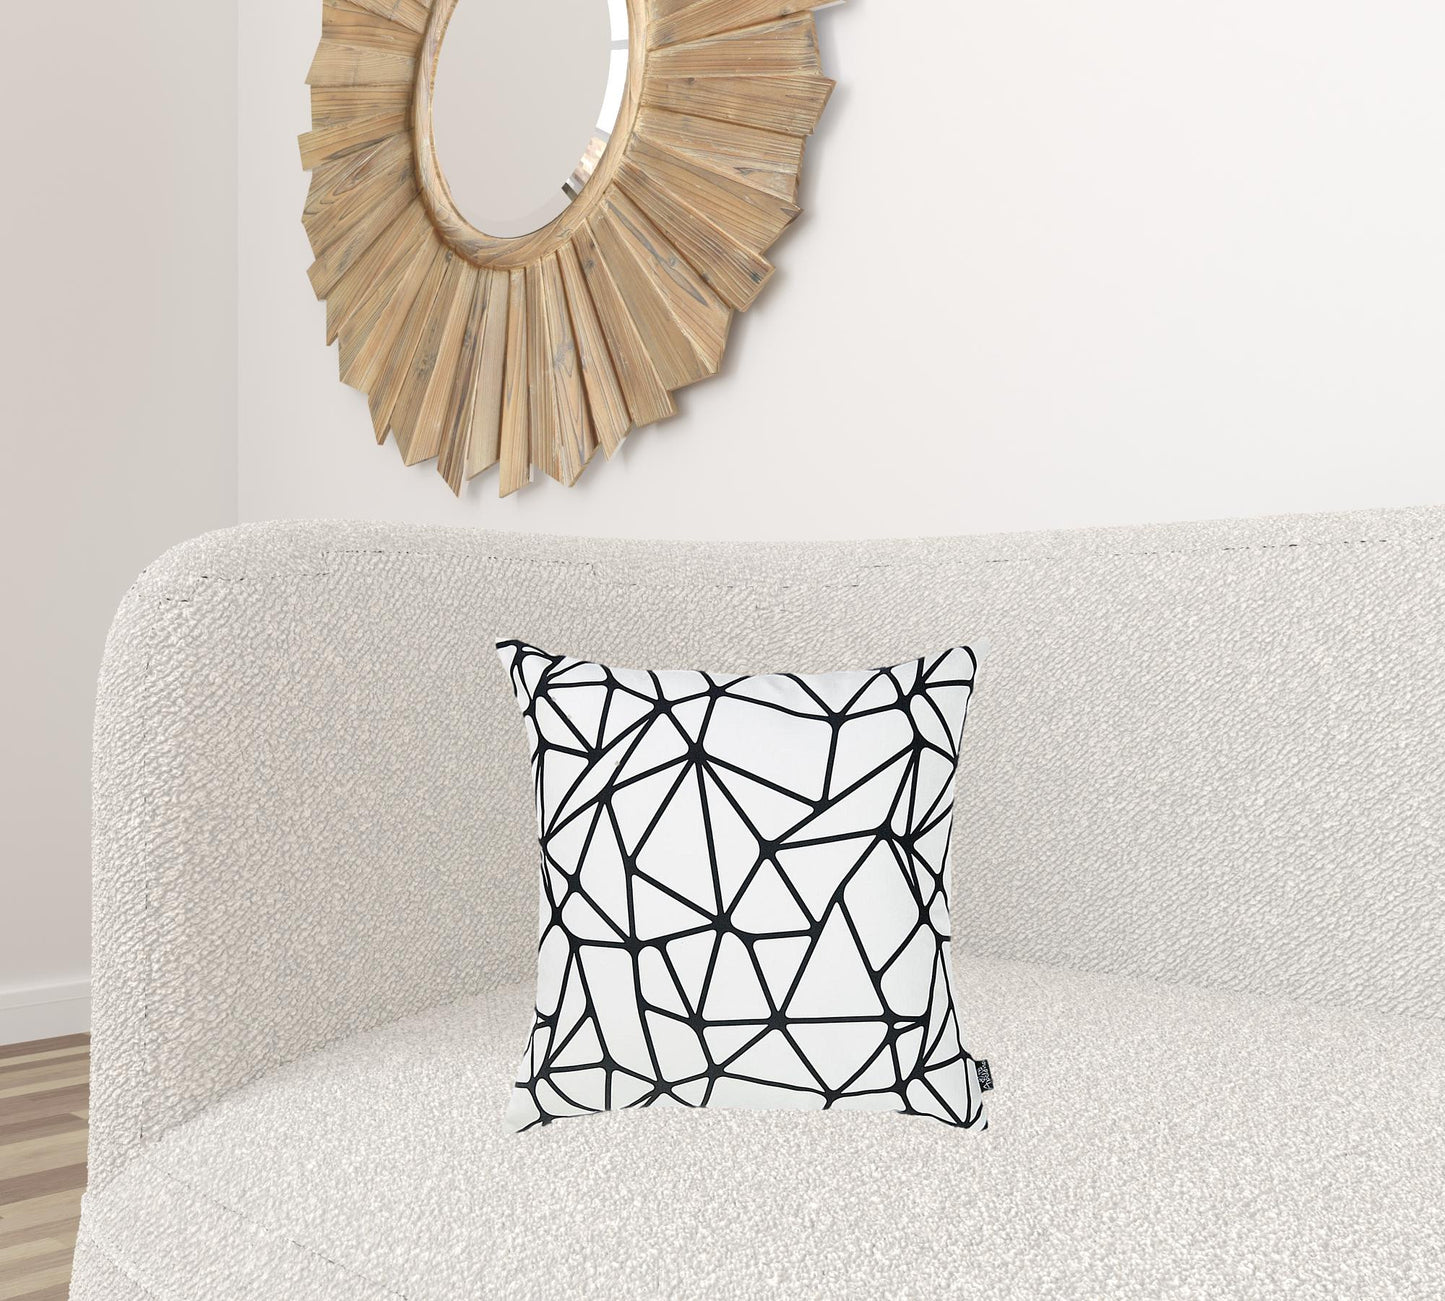 18" X 18" Black and White Polyester Pillow Cover